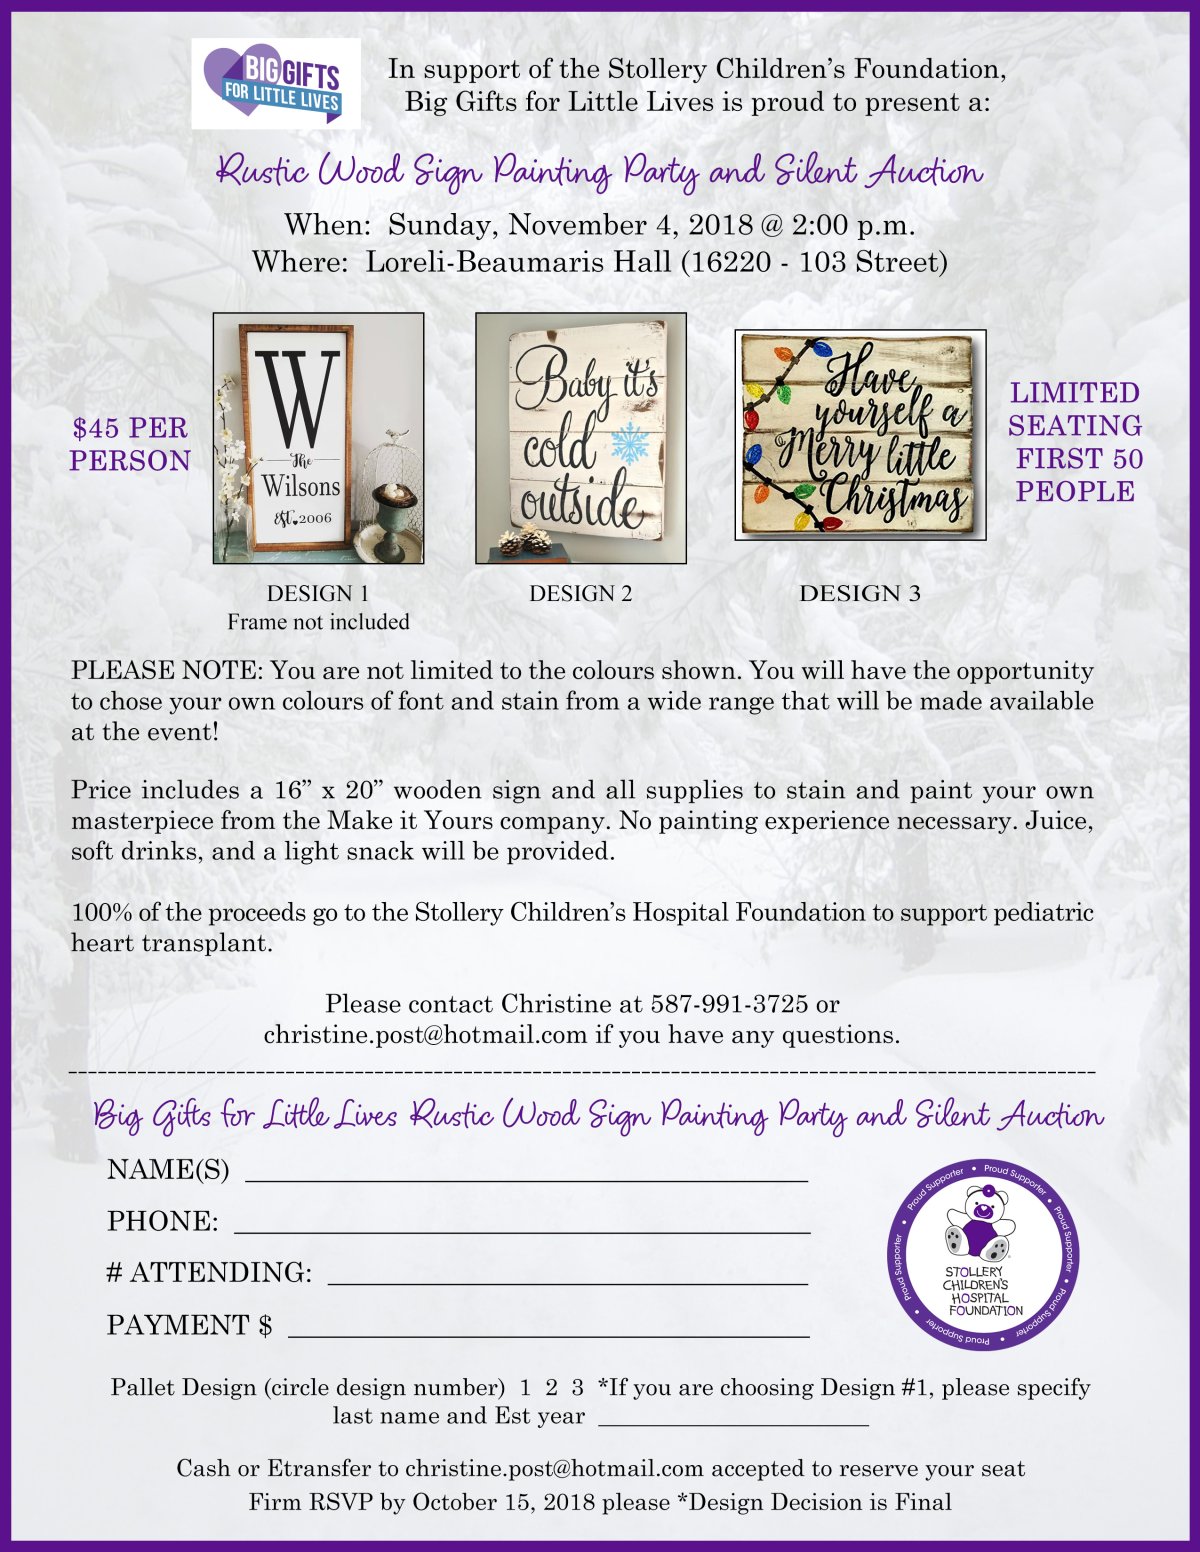 Rustic Wood Sign Painting Party & Silent Auction in support of Stollery Children’s Hospital Foundation - image